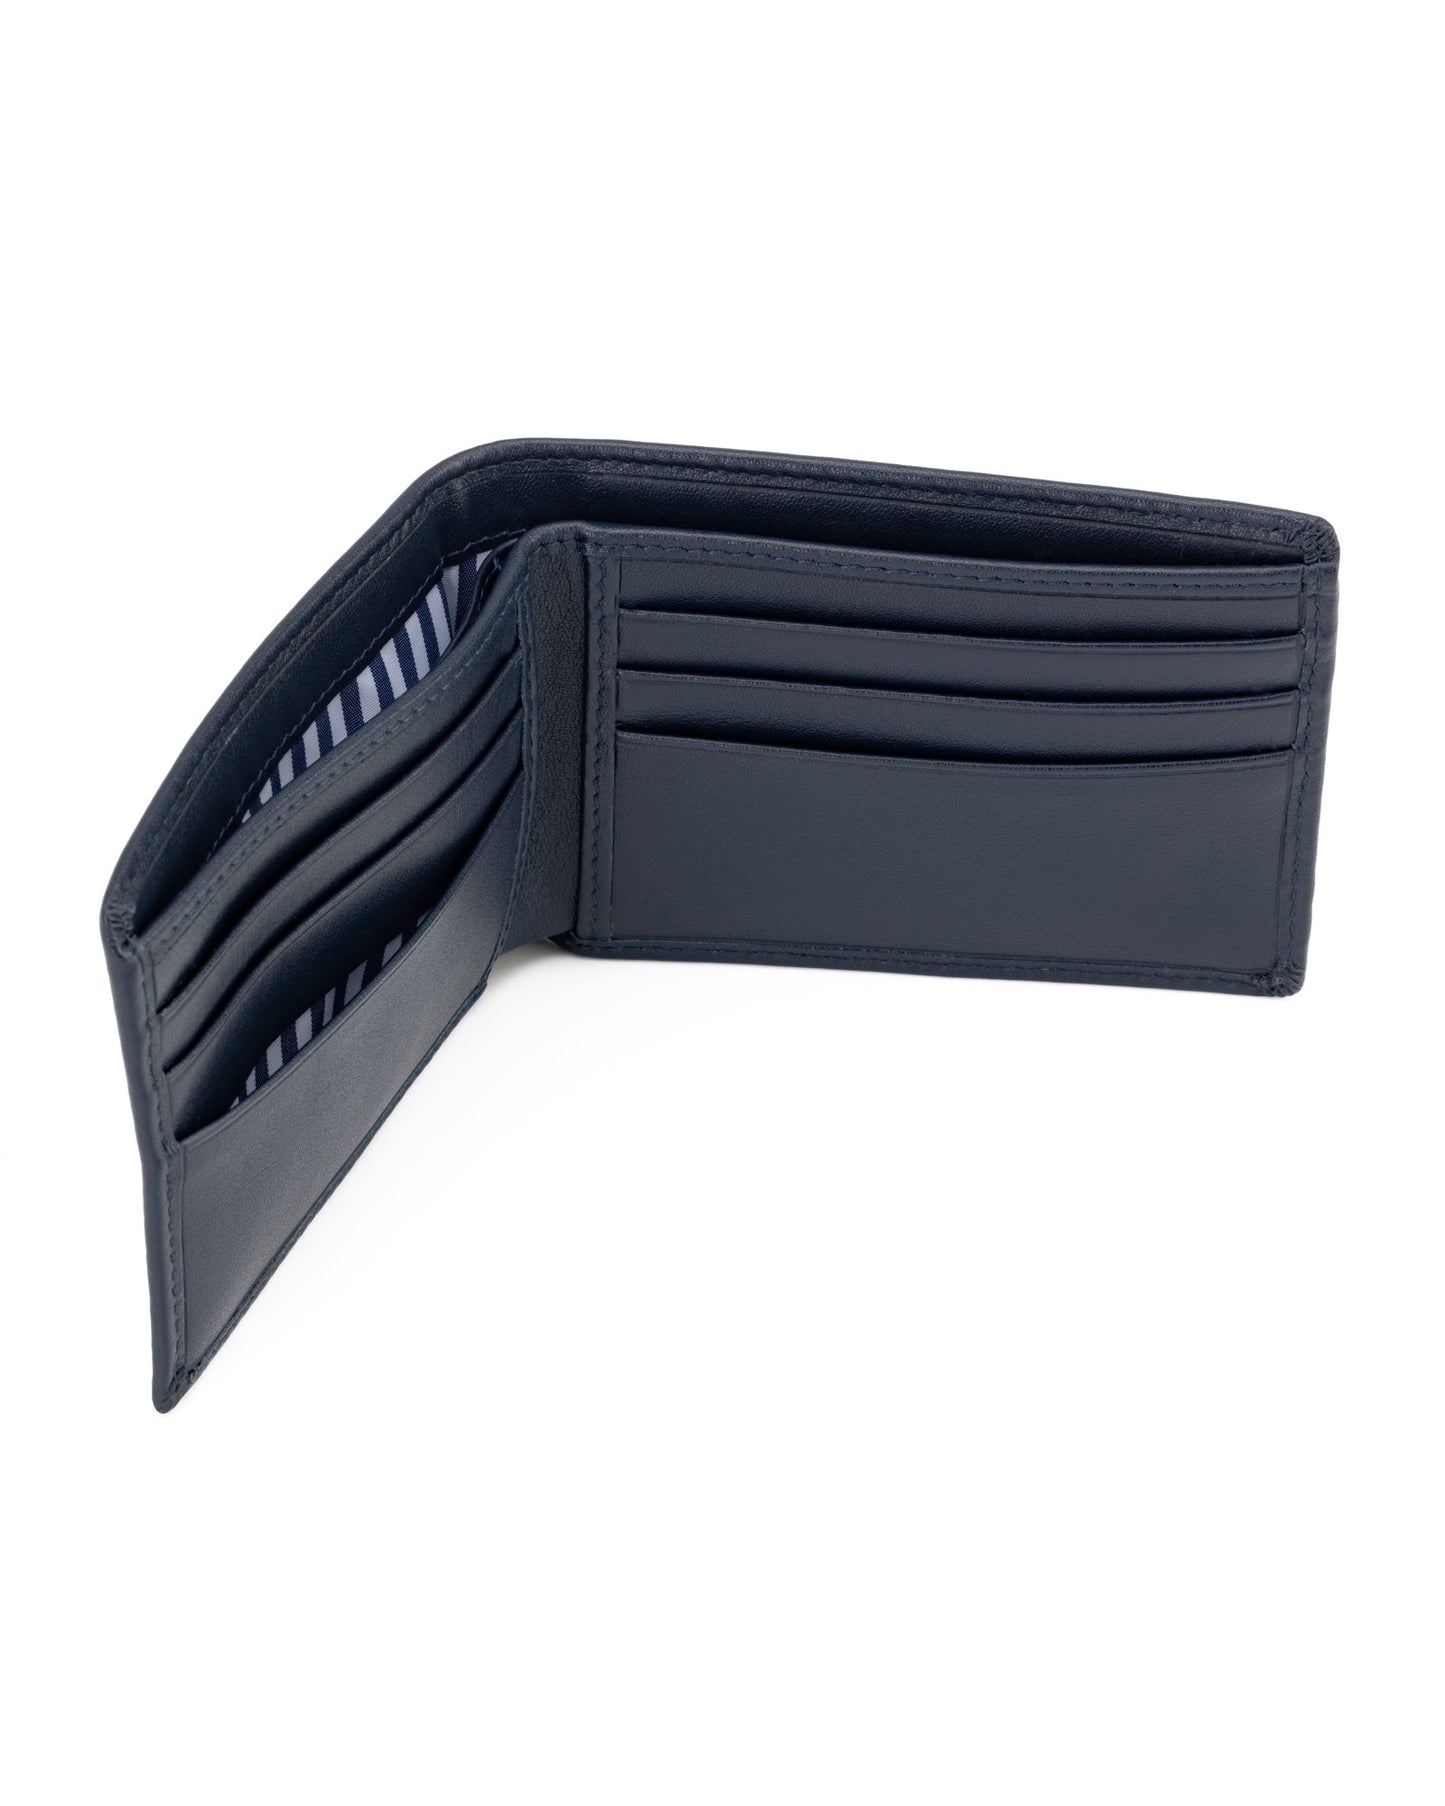 Leather Wallet Ortc